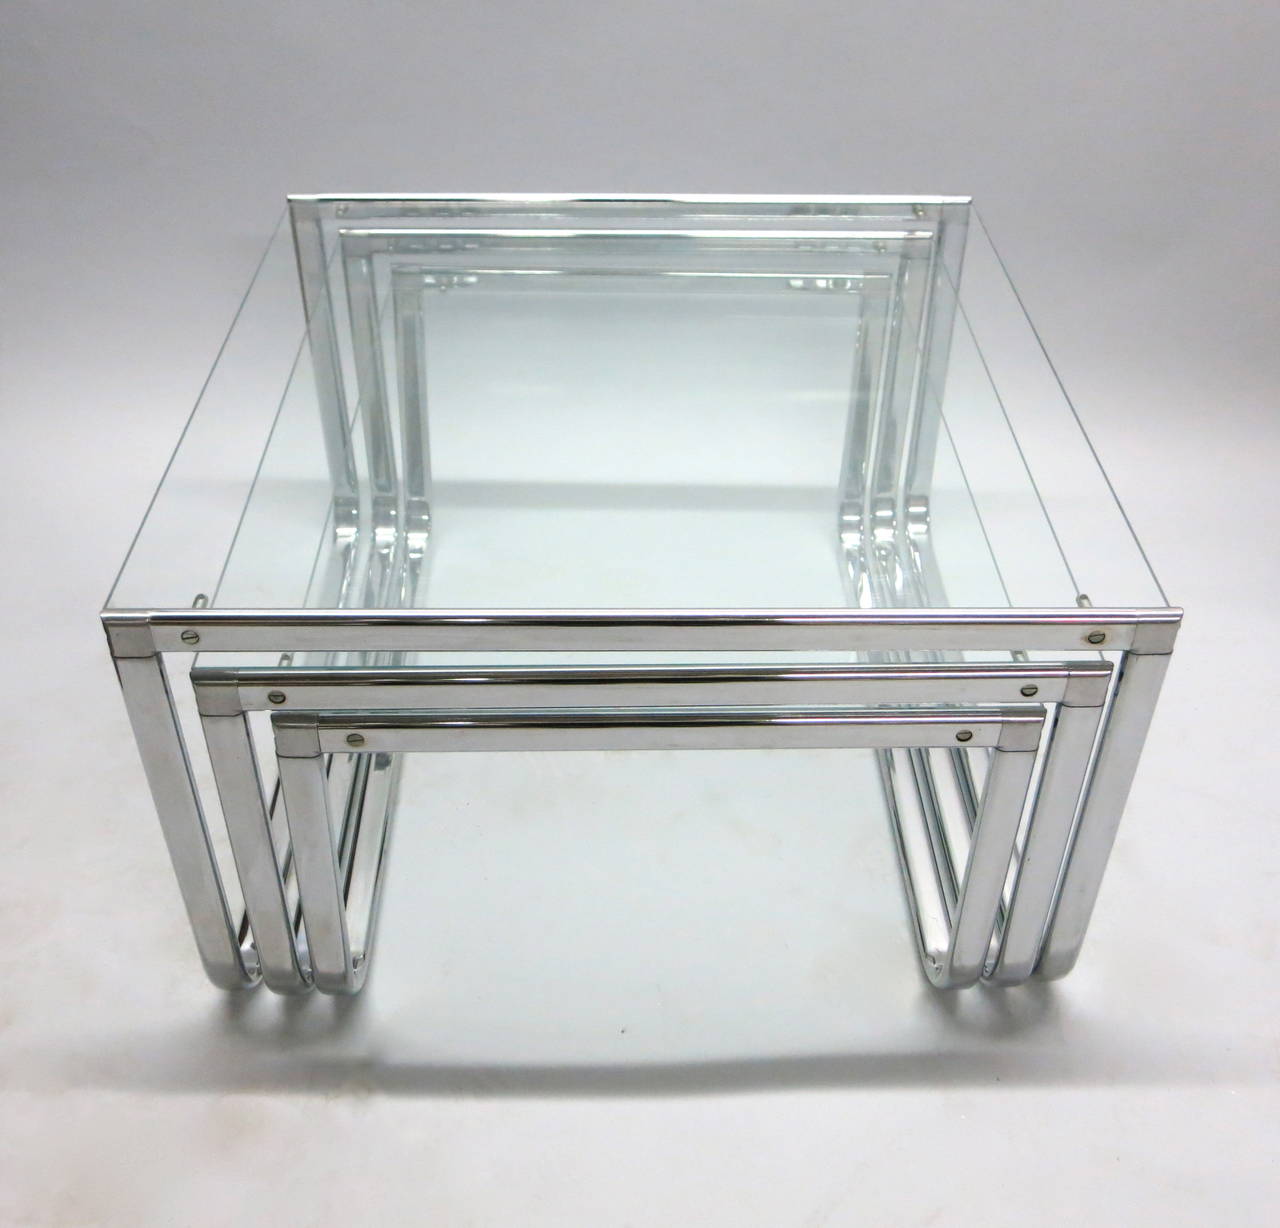 Set of polished metal and clear glass nesting tables labeled 'Made in Italy' designed to allow each table to move freely in two directions, backwards or forwards as displayed in images 5 and 6. These can also be functional as a coffee table.